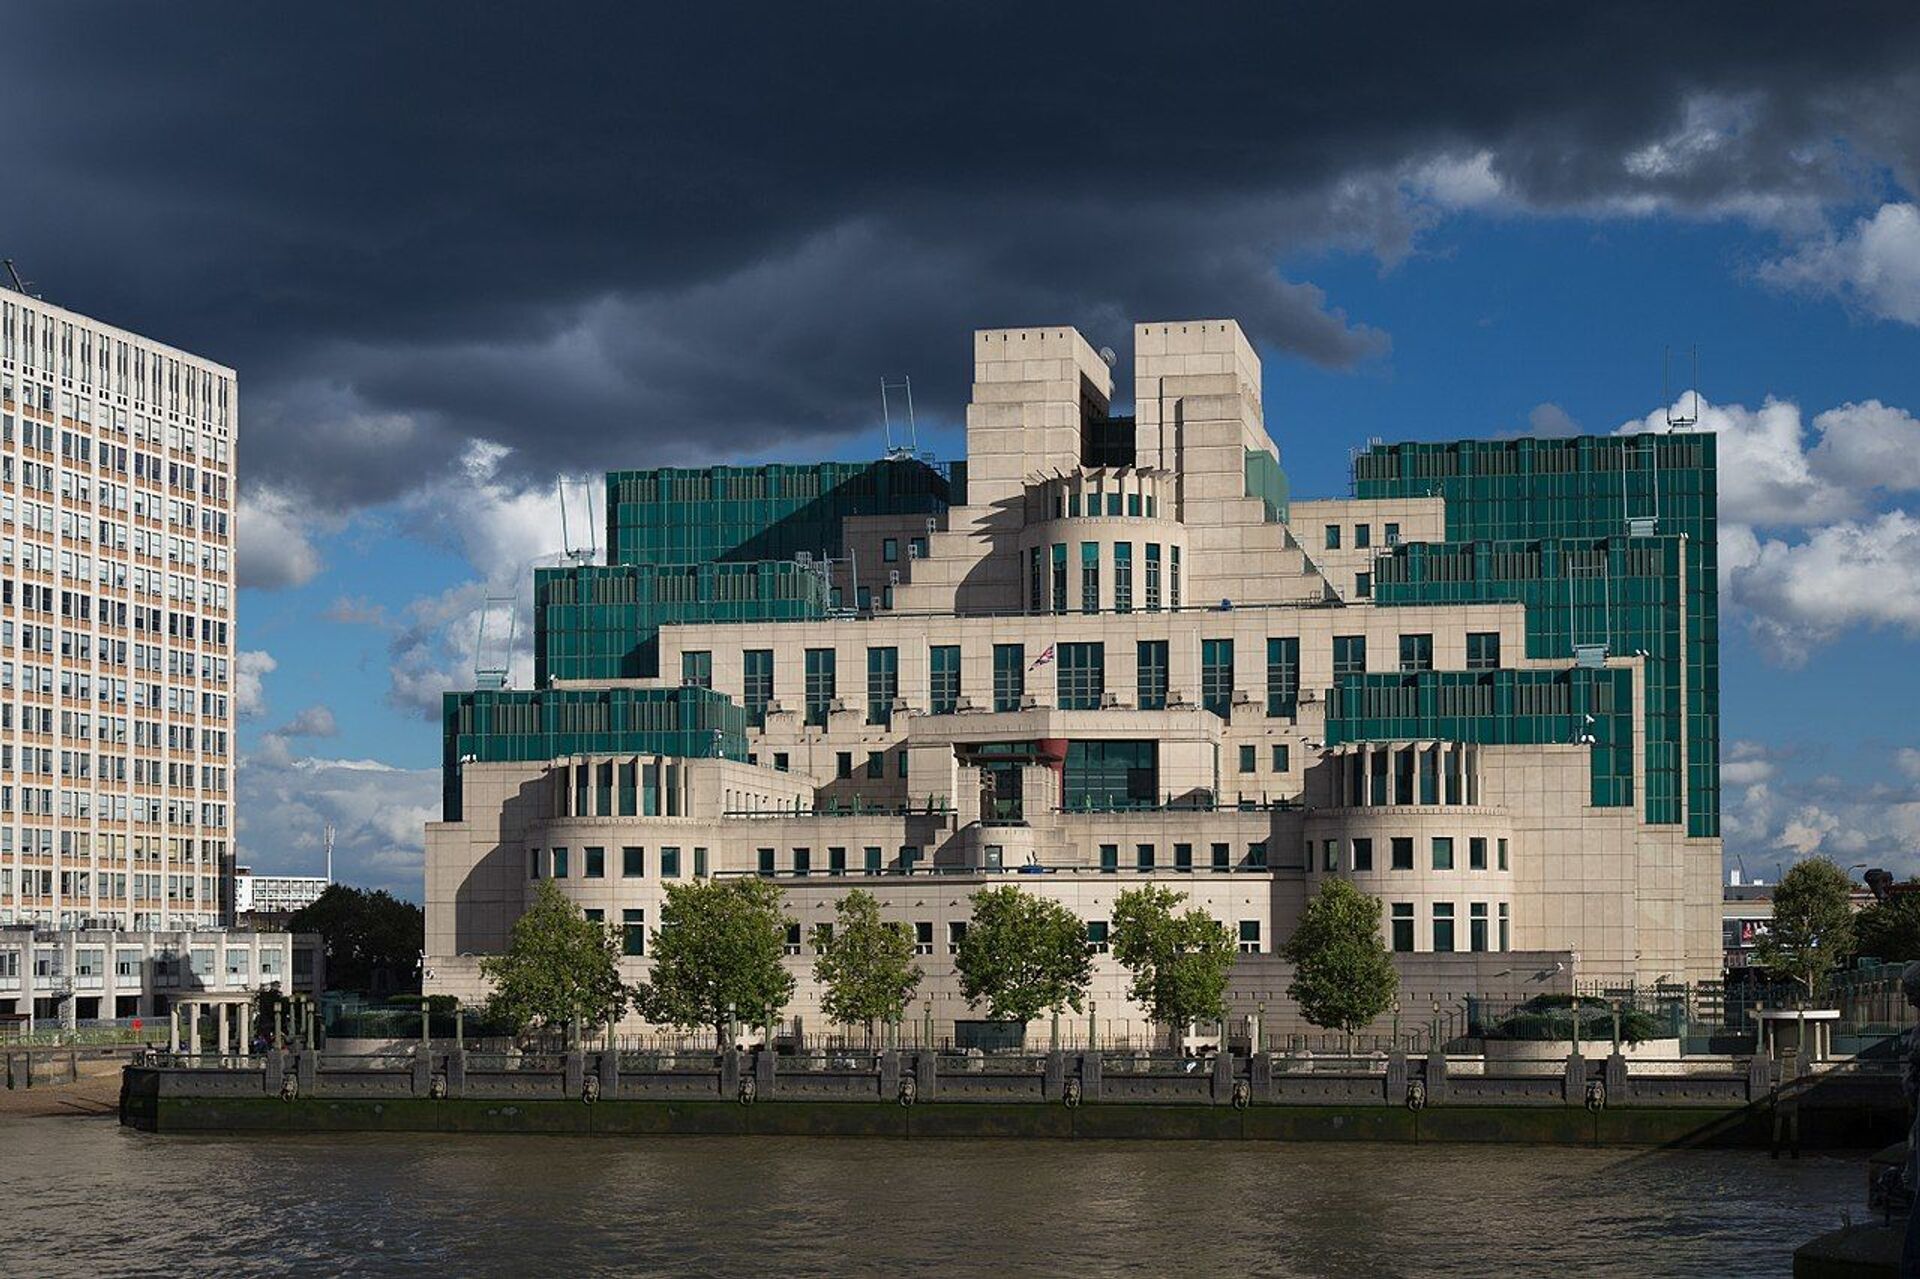 Licensed Troubleshooters Wanted: MI6 Reportedly Recruiting Part-Time 'James Bond'-Style Spies - Sputnik International, 1920, 02.02.2021